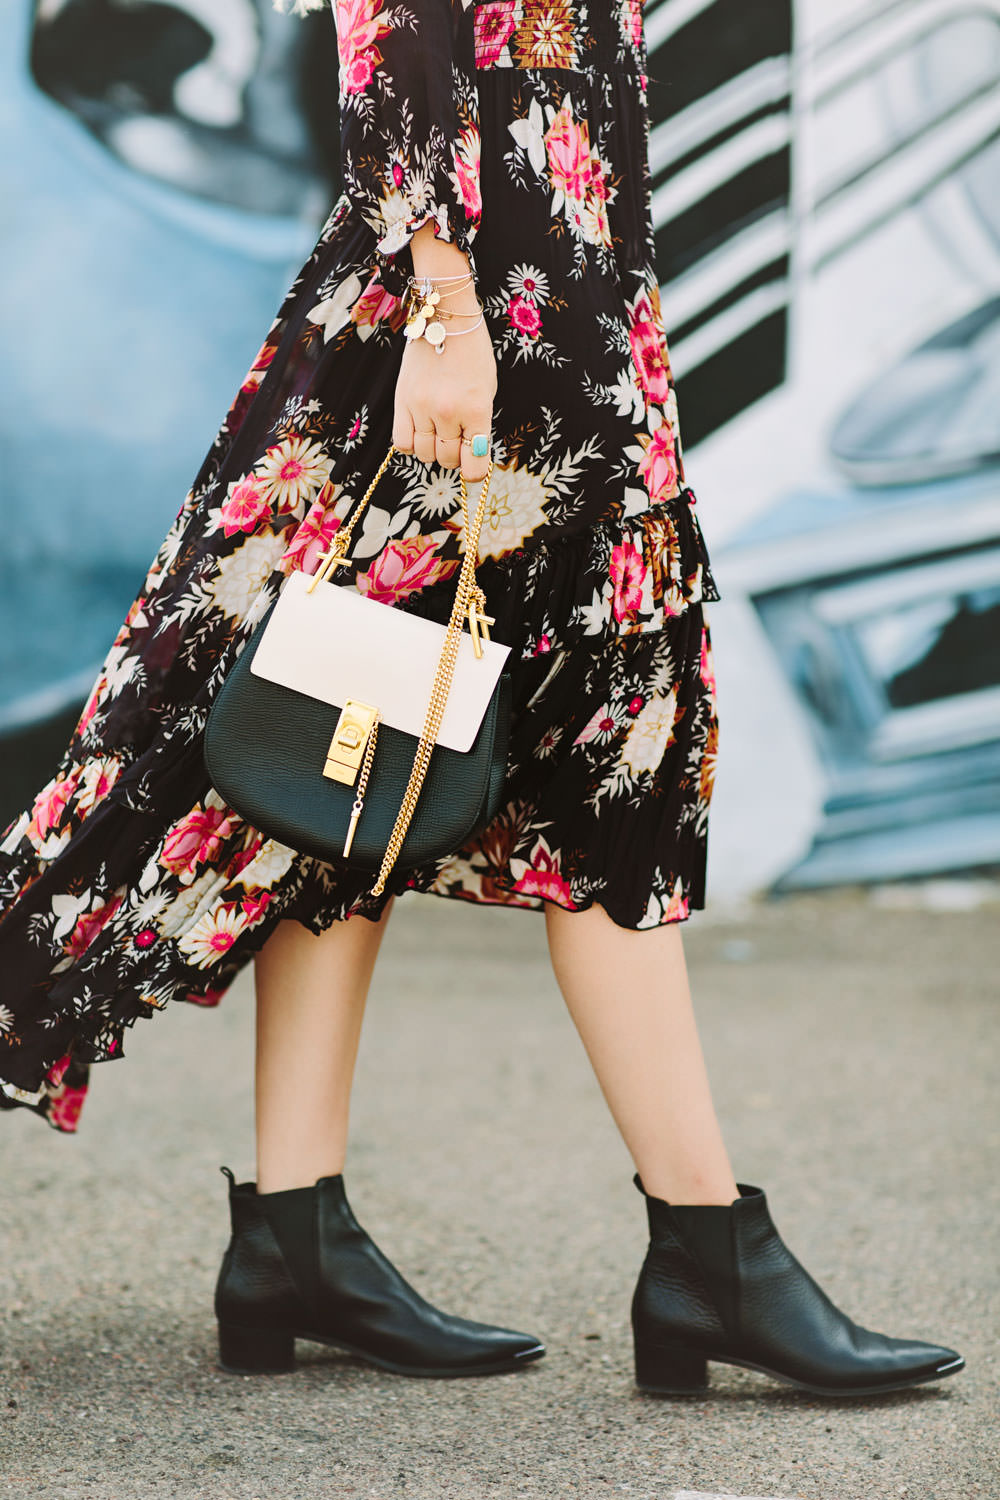 Black Floral Dress Summer Outfits (29 ideas & outfits)